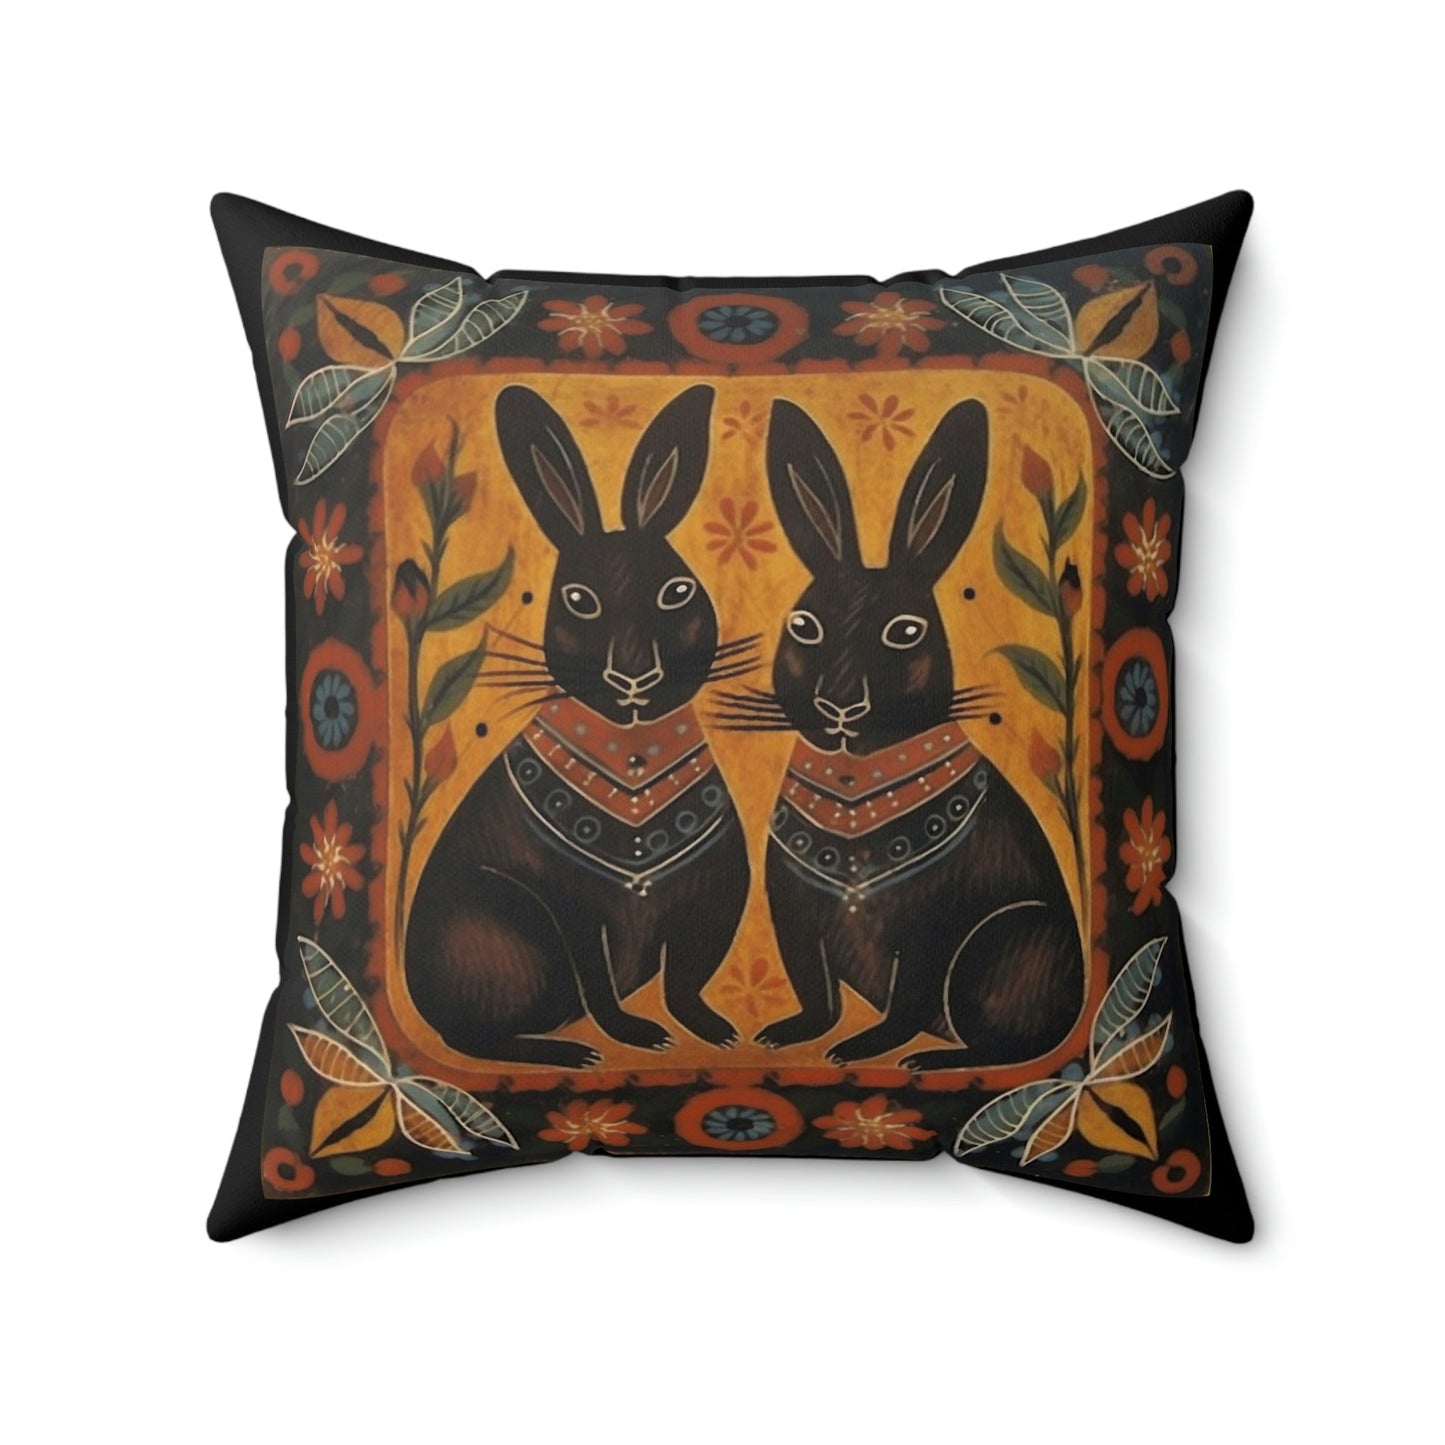 Rustic Folk Art Bunny Couple Design Square Pillow - Cottagecore Country Farm Style Gift for Yourself or Loved Ones